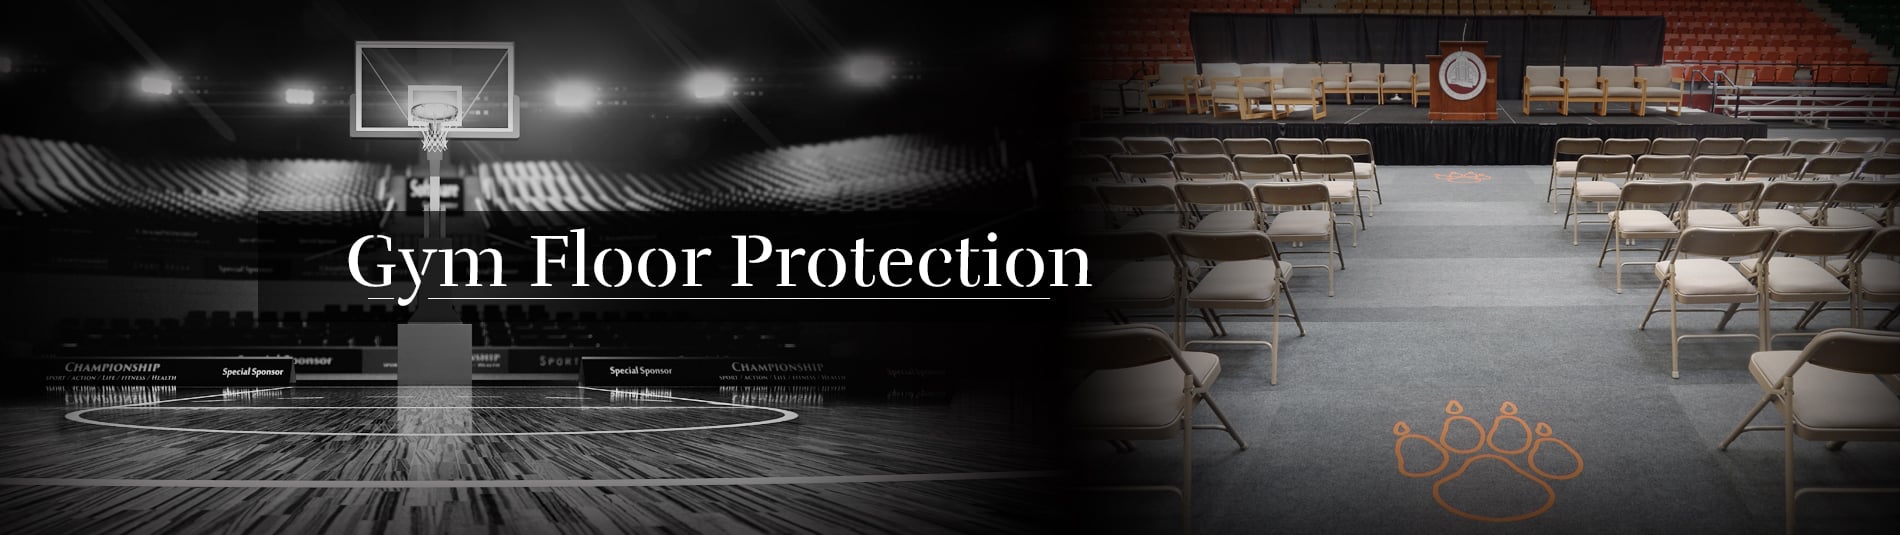 4 Gym Floor Protection banner 2